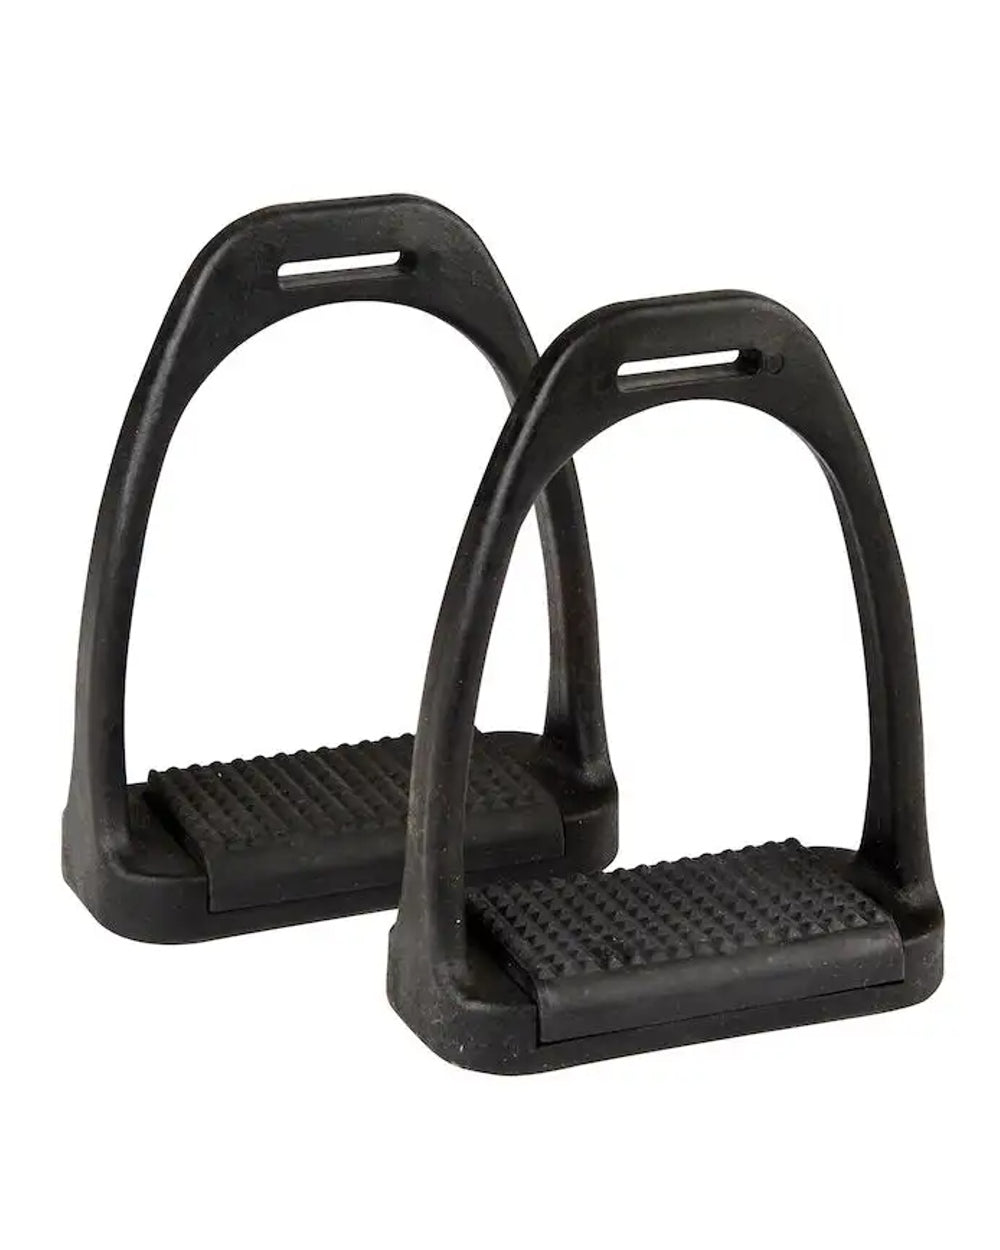 Black coloured Korsteel Polymer Stirrup Irons With Coloured Treads on white background 